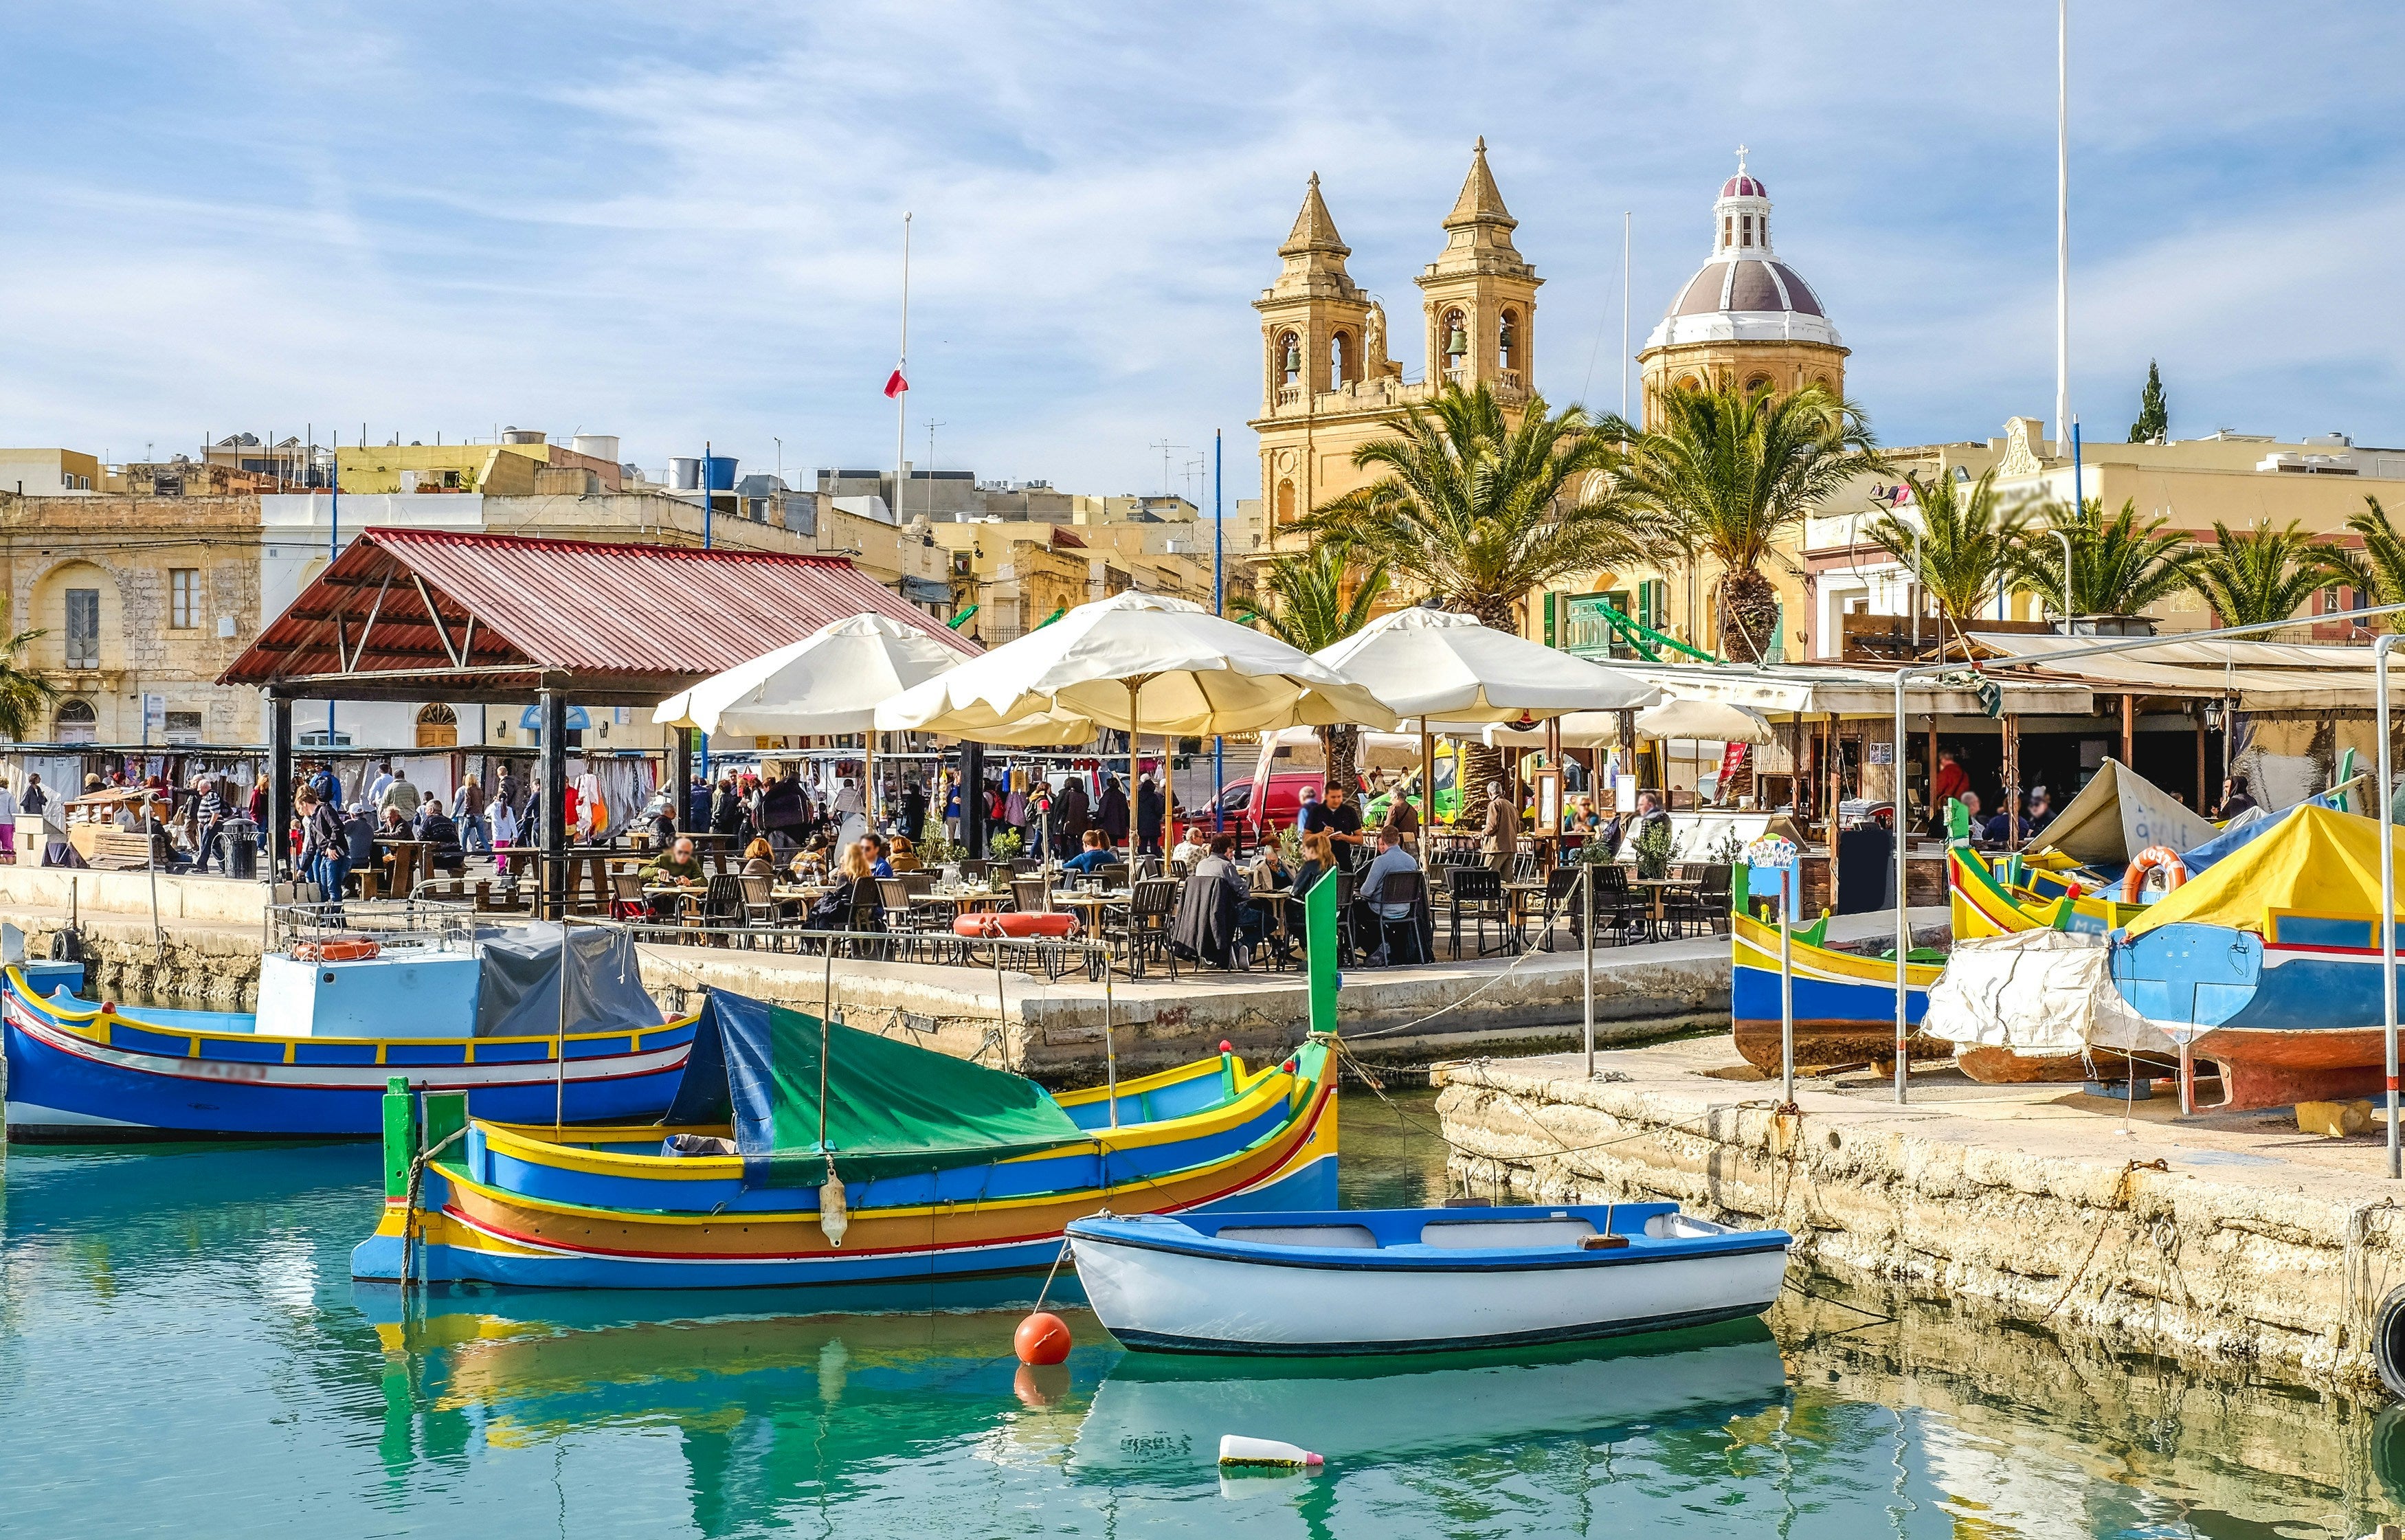 A boat trip is a gret way to experience Malta’s gorgeous coastline